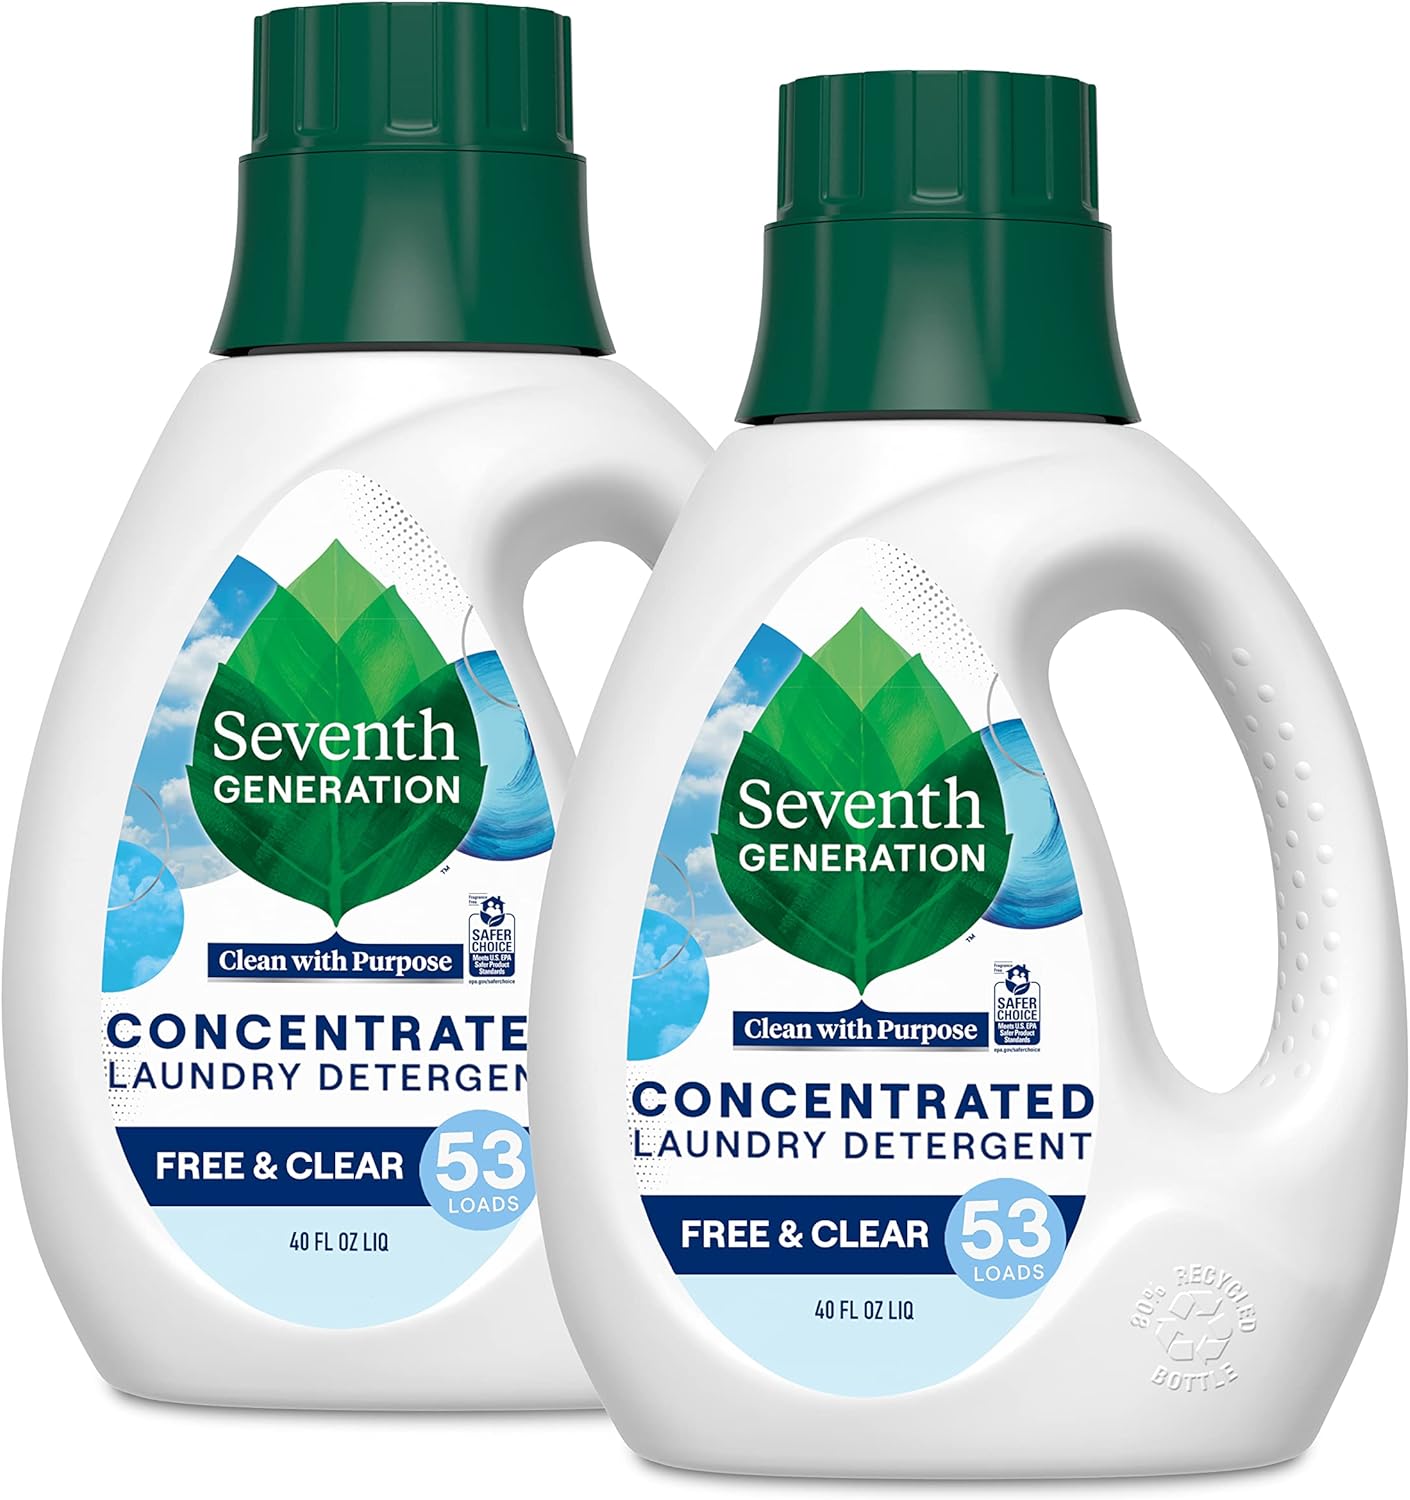 Seventh Generation Concentrated Laundry Detergent Liquid Free & Clear Fragrance Free 40 Fl Oz (Pack of 2)